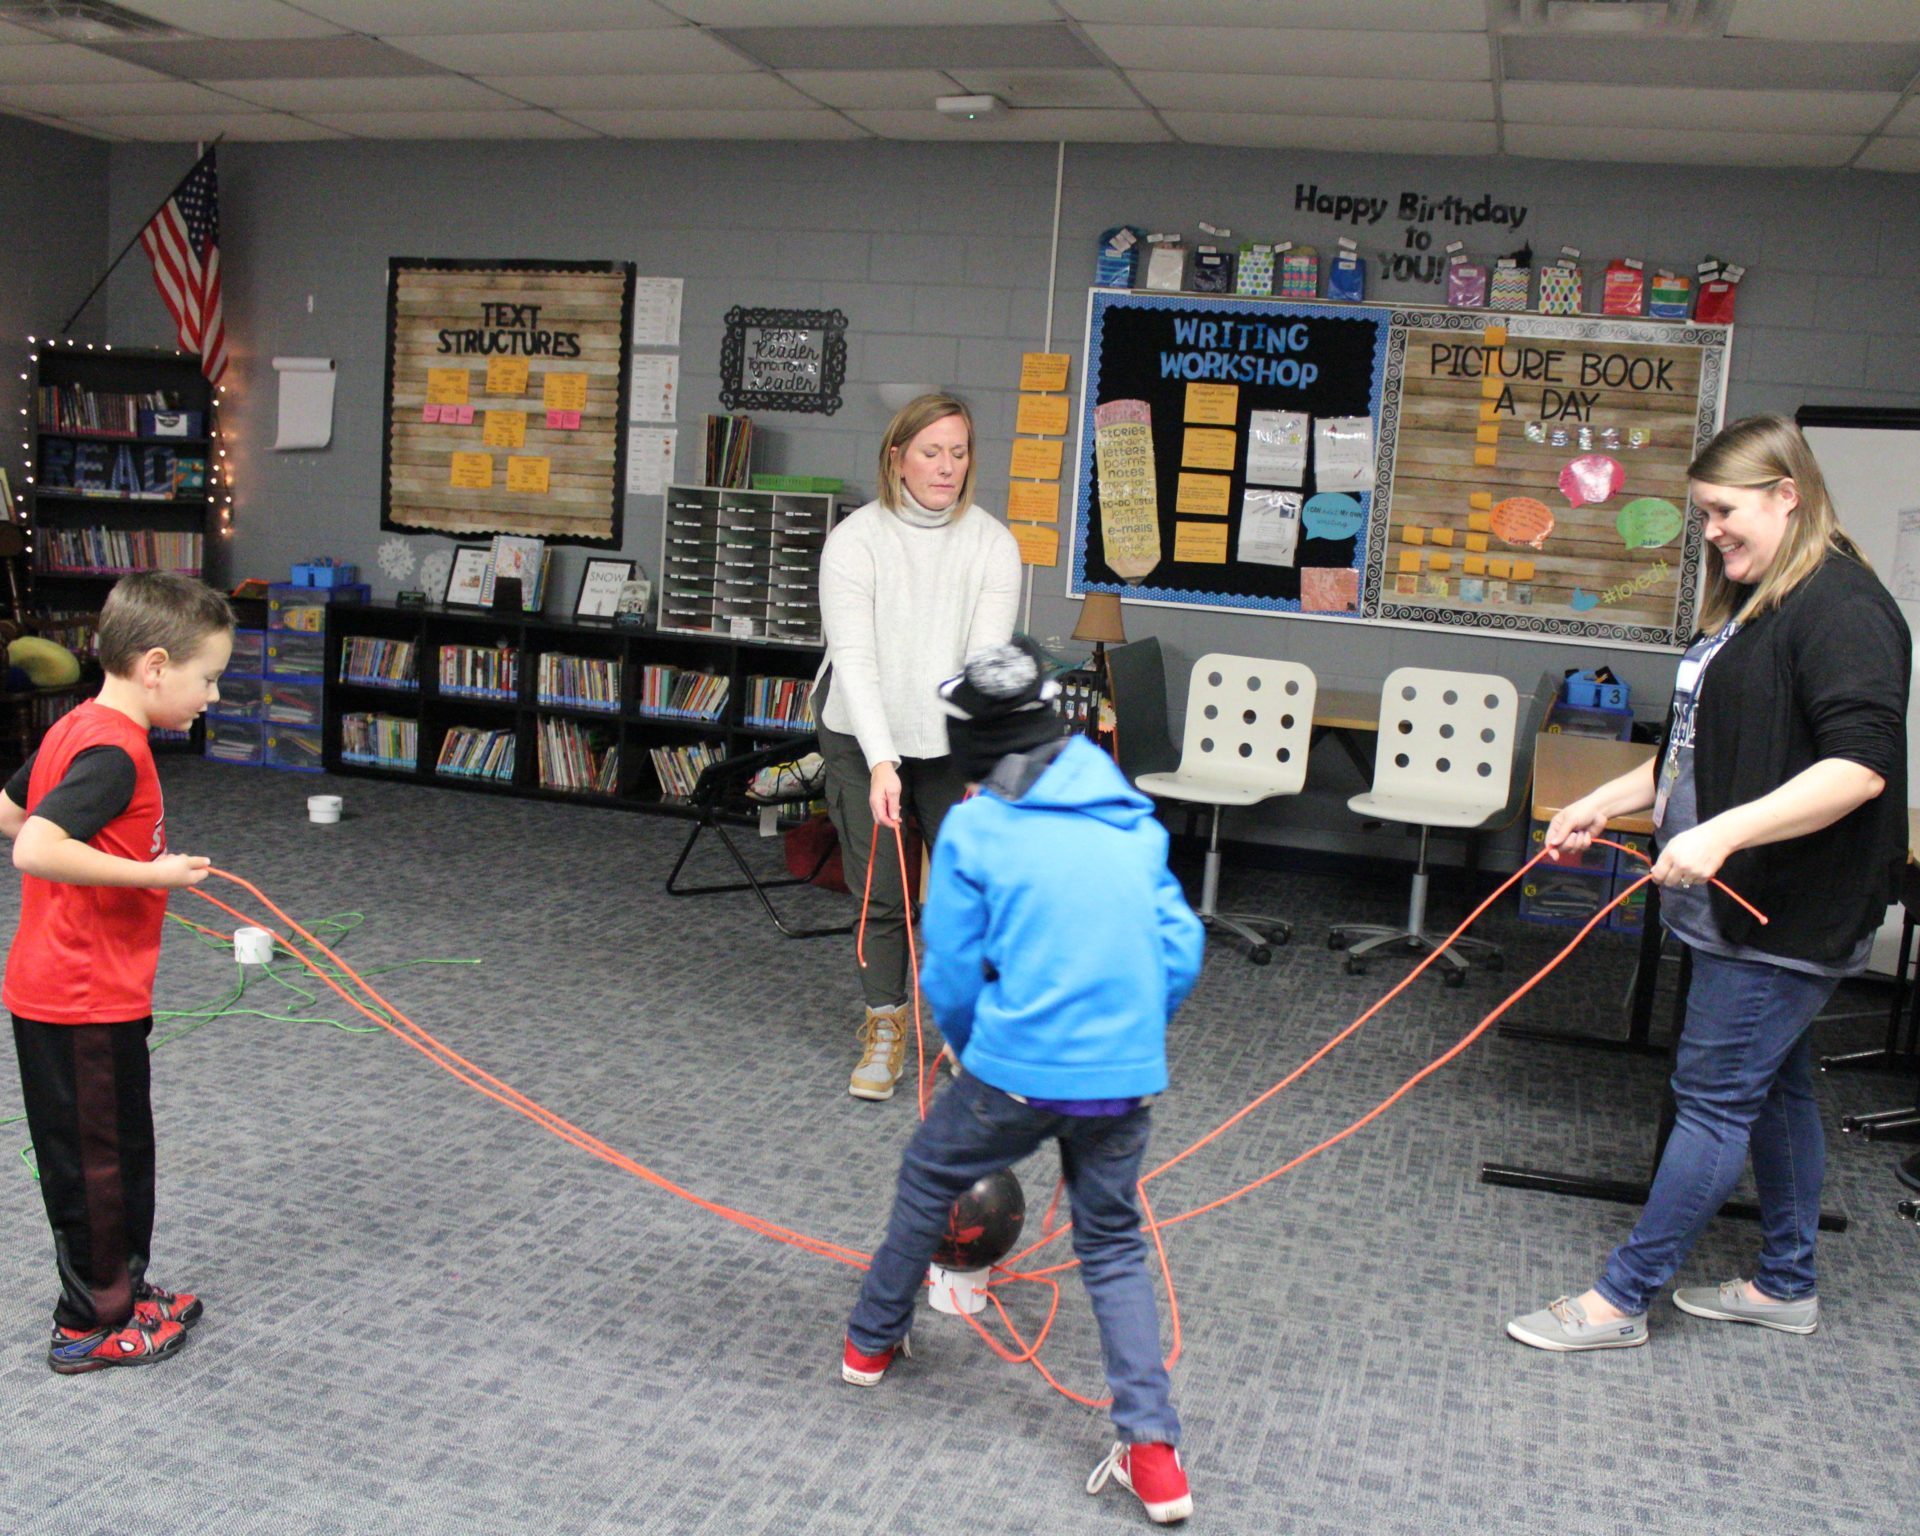 A group of students and adults try to lift a ball with string.